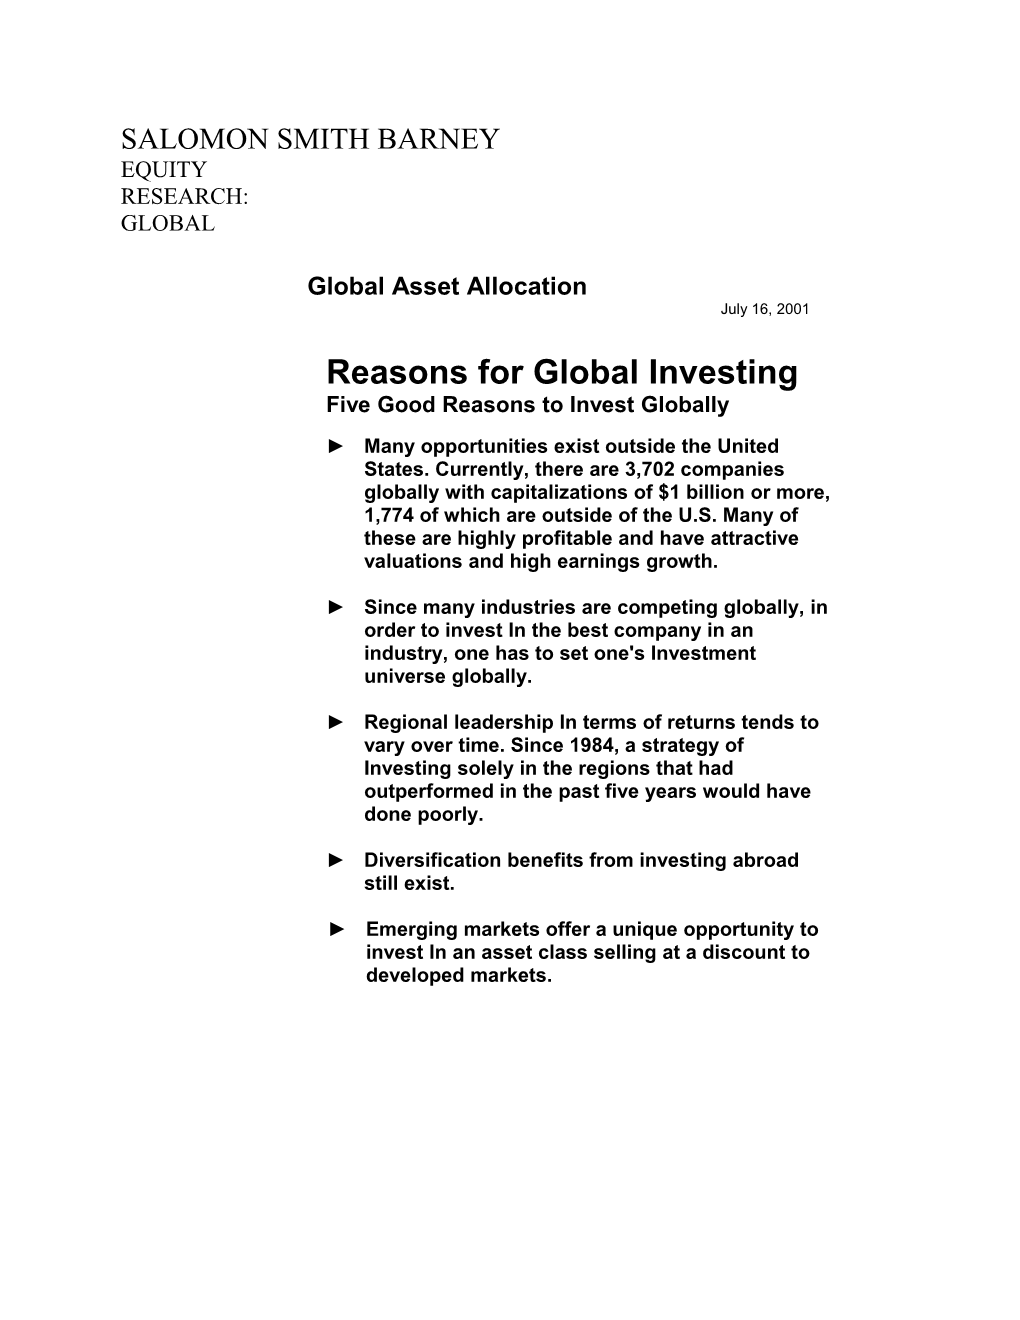 Reasons for Global Investing